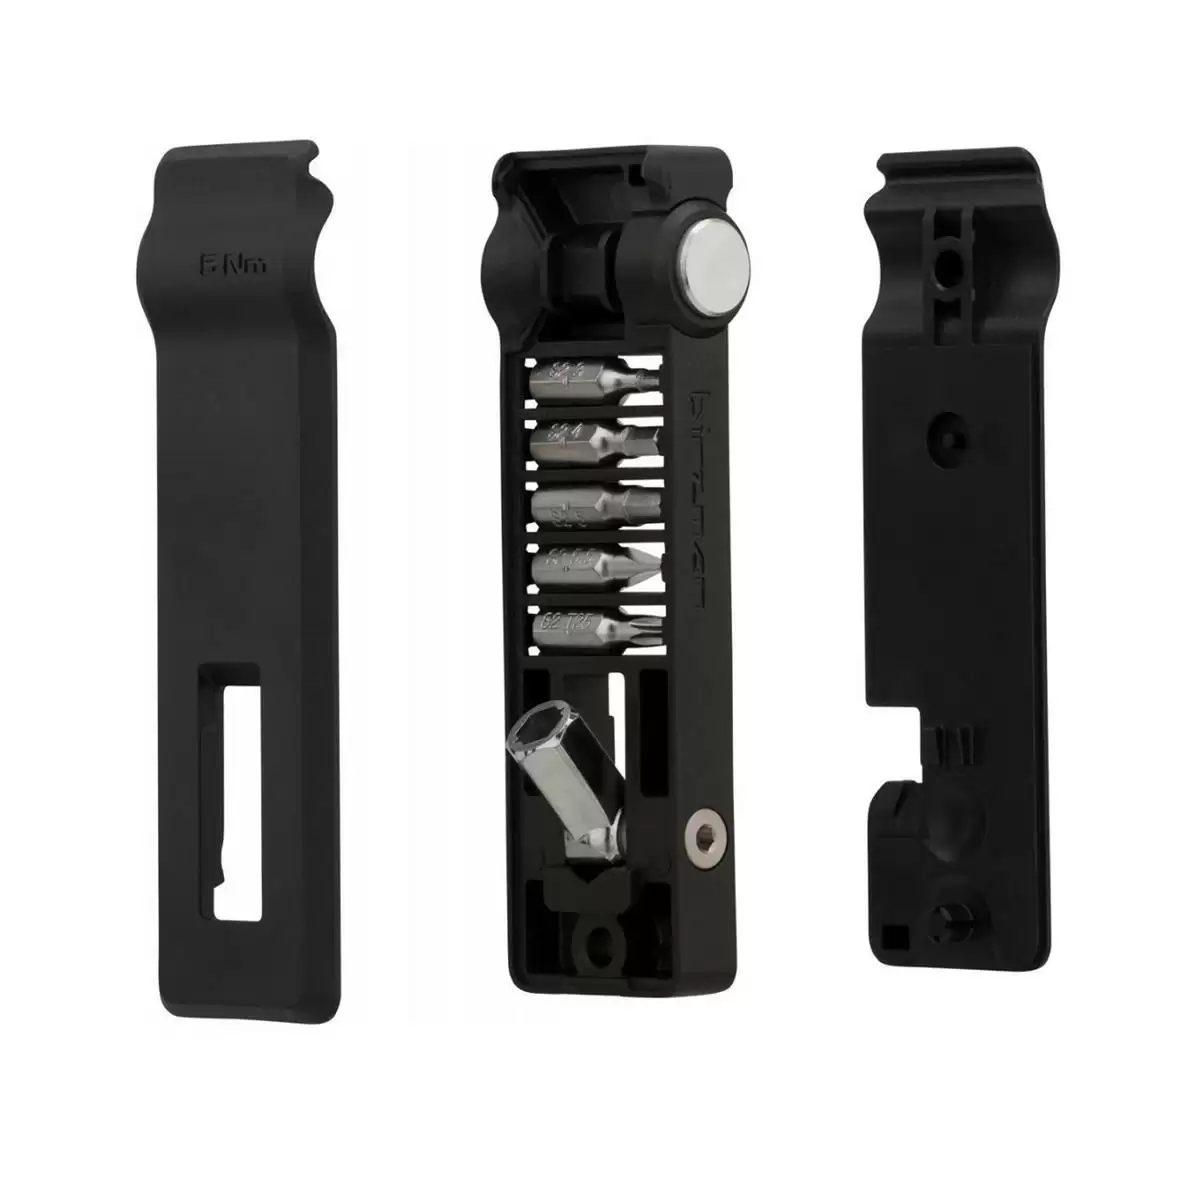 Multitool M-Torque Ranger with 5nm torque wrench and tire levers - image